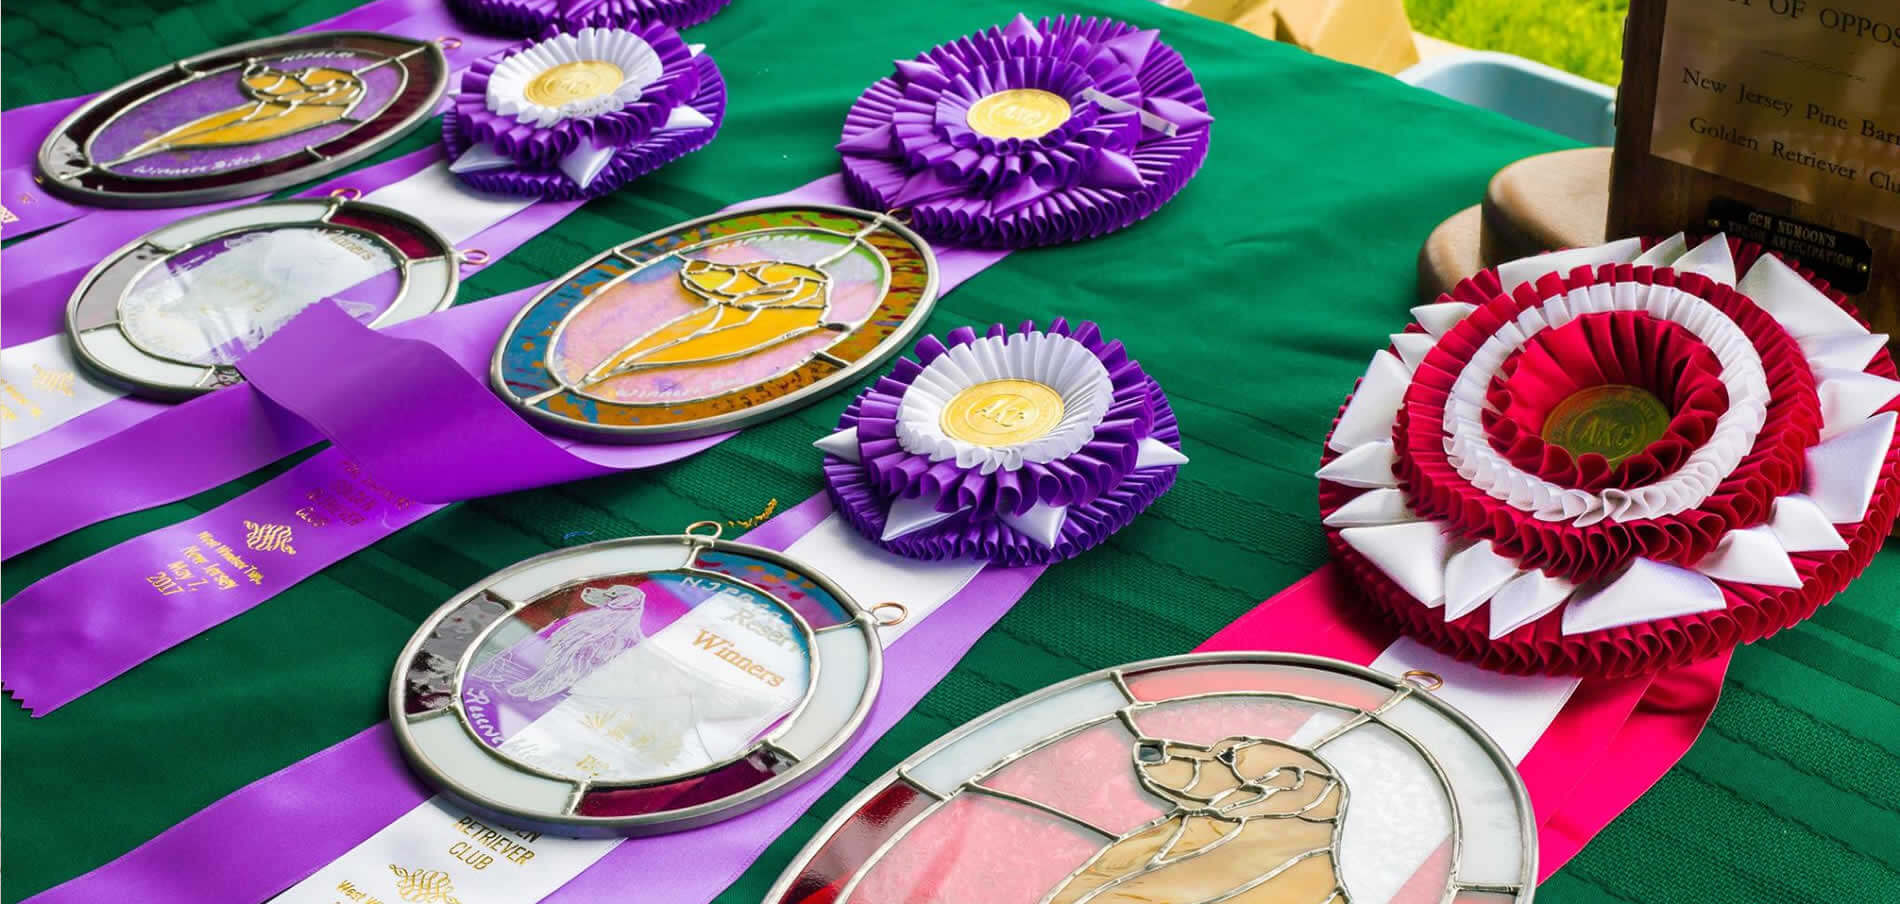 Table of colorful ribbons at Specialty Dog Show